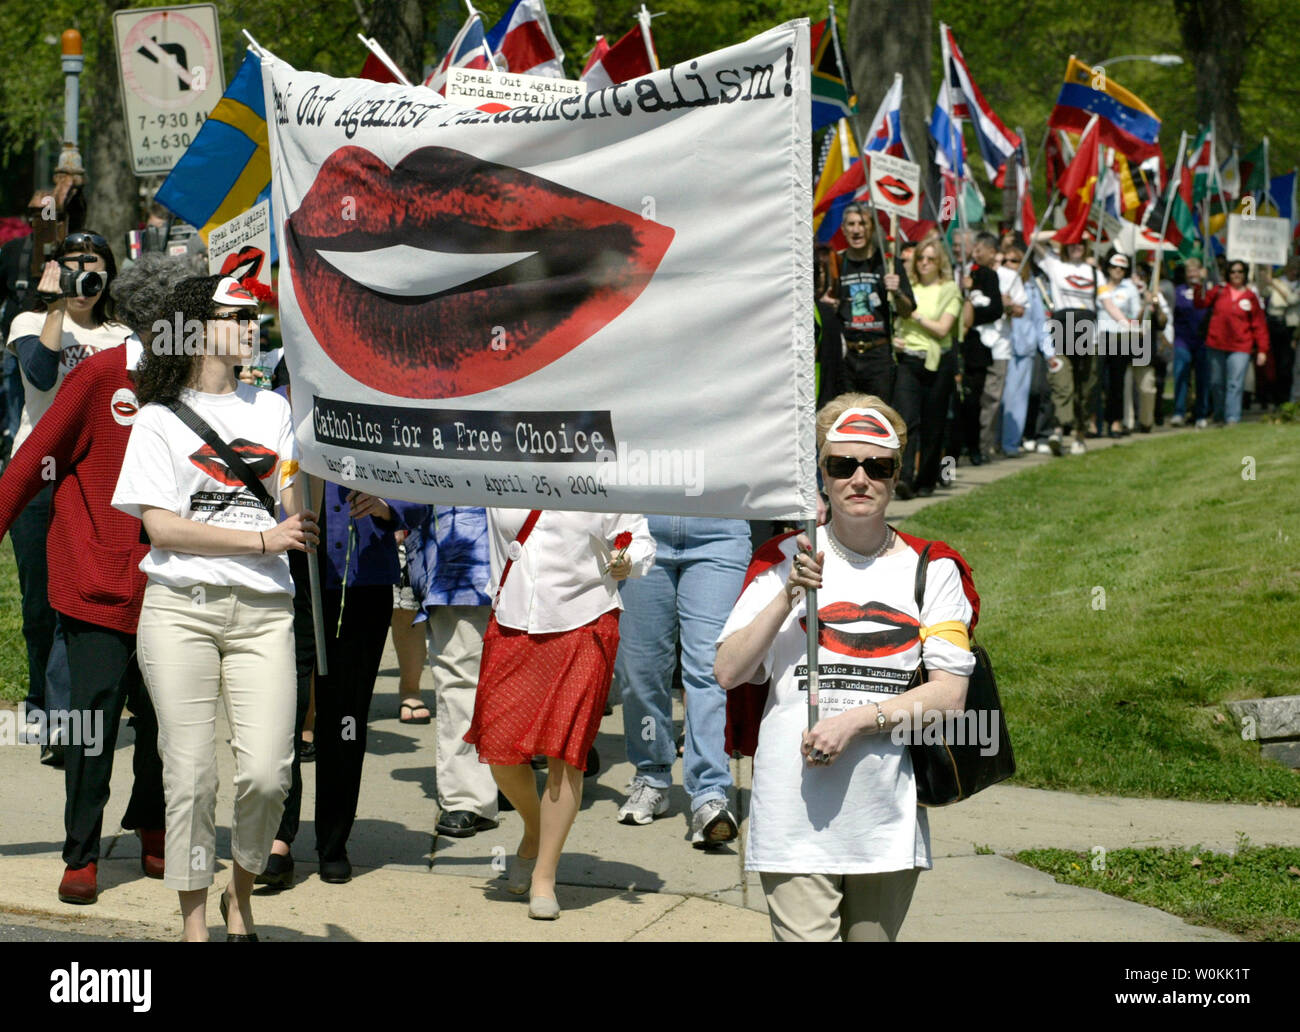 Catholics for a Free Choice supporters march to the Vatican Embassy in Washington, April 24, 2004. Anti-abortion activists are staging their own protests a day ahead of a major pro-choice rally on the National Mall. (UPI Photo/Yuri Gripas) Stock Photo